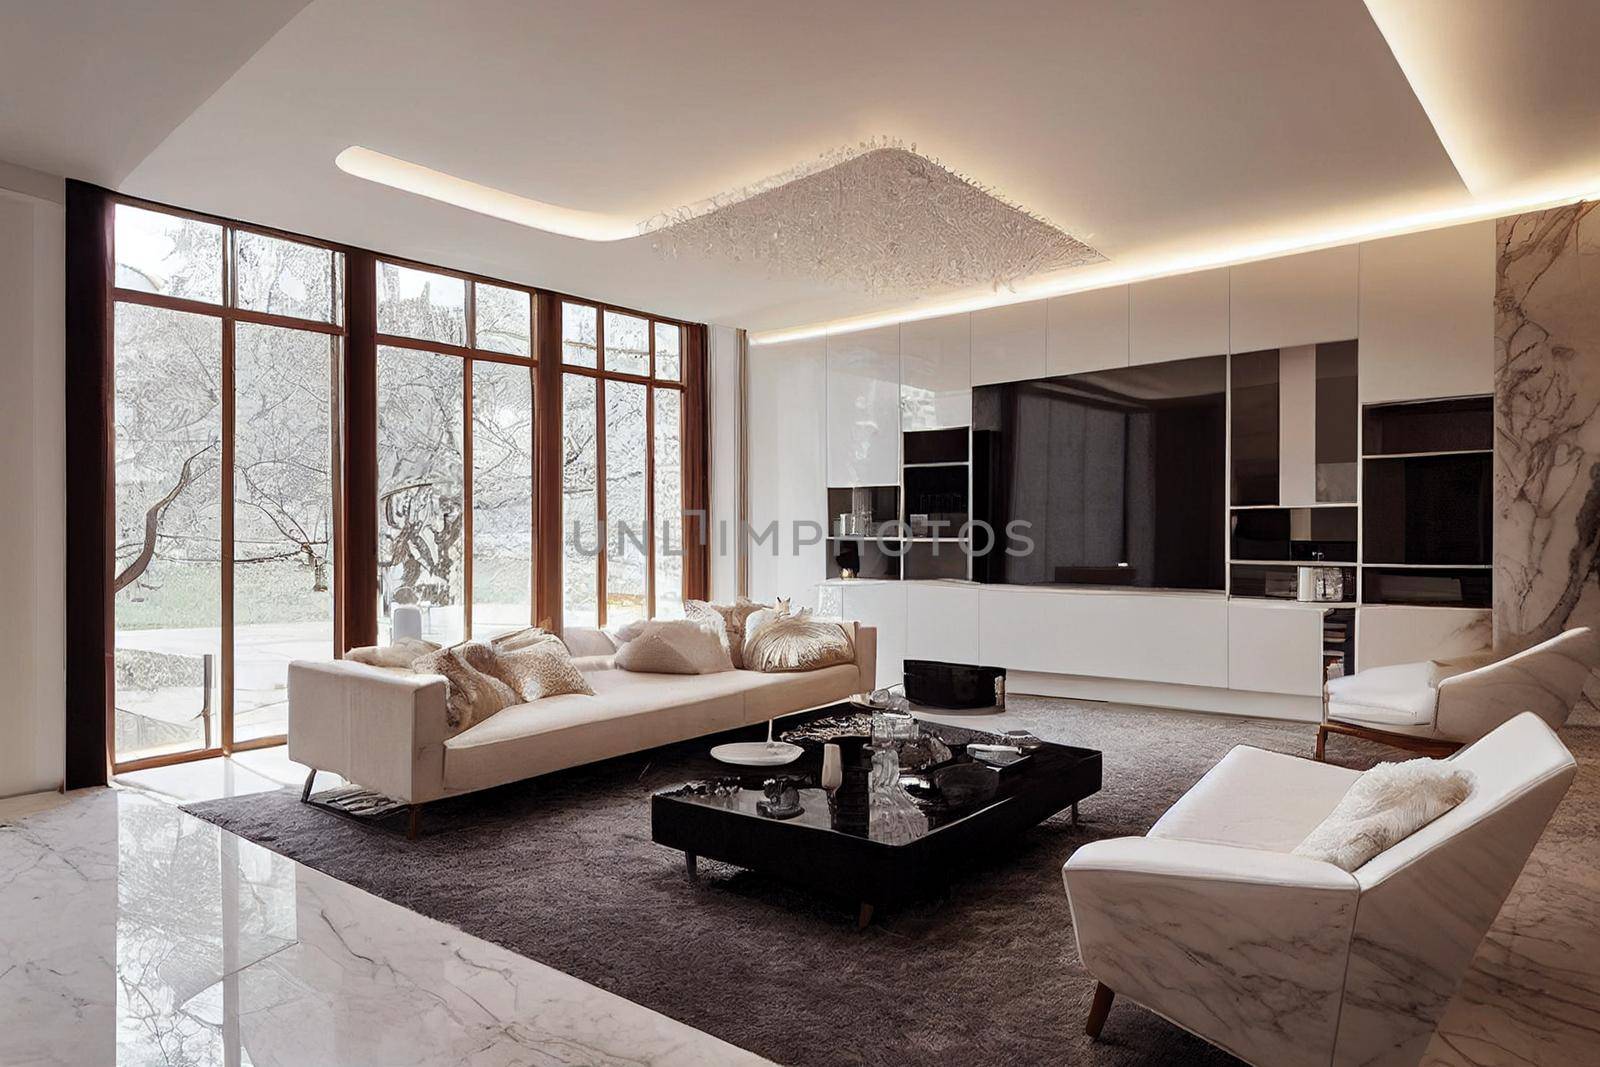 Modern living room 3D render with white luxurious furniture, white glossy marble floor and creative wooden chairs